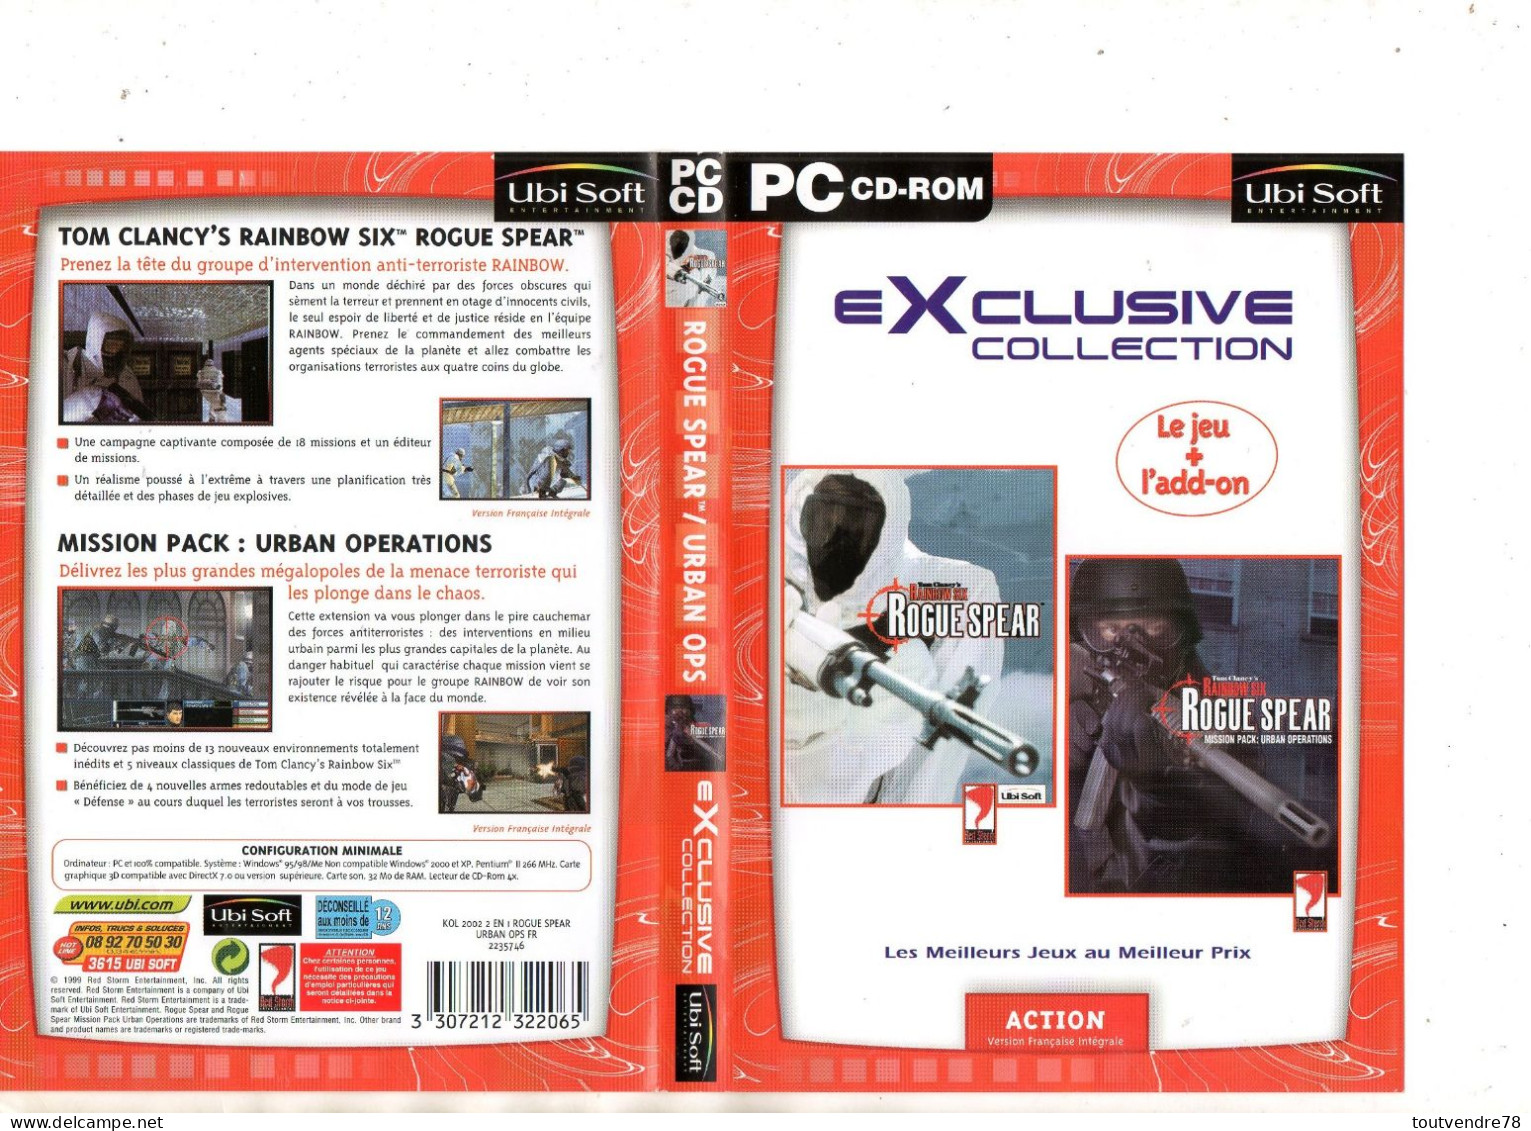 PC07 : Jeu PC "Rainbow Six - Roque Spear" + "Mission Pack" - Juegos PC